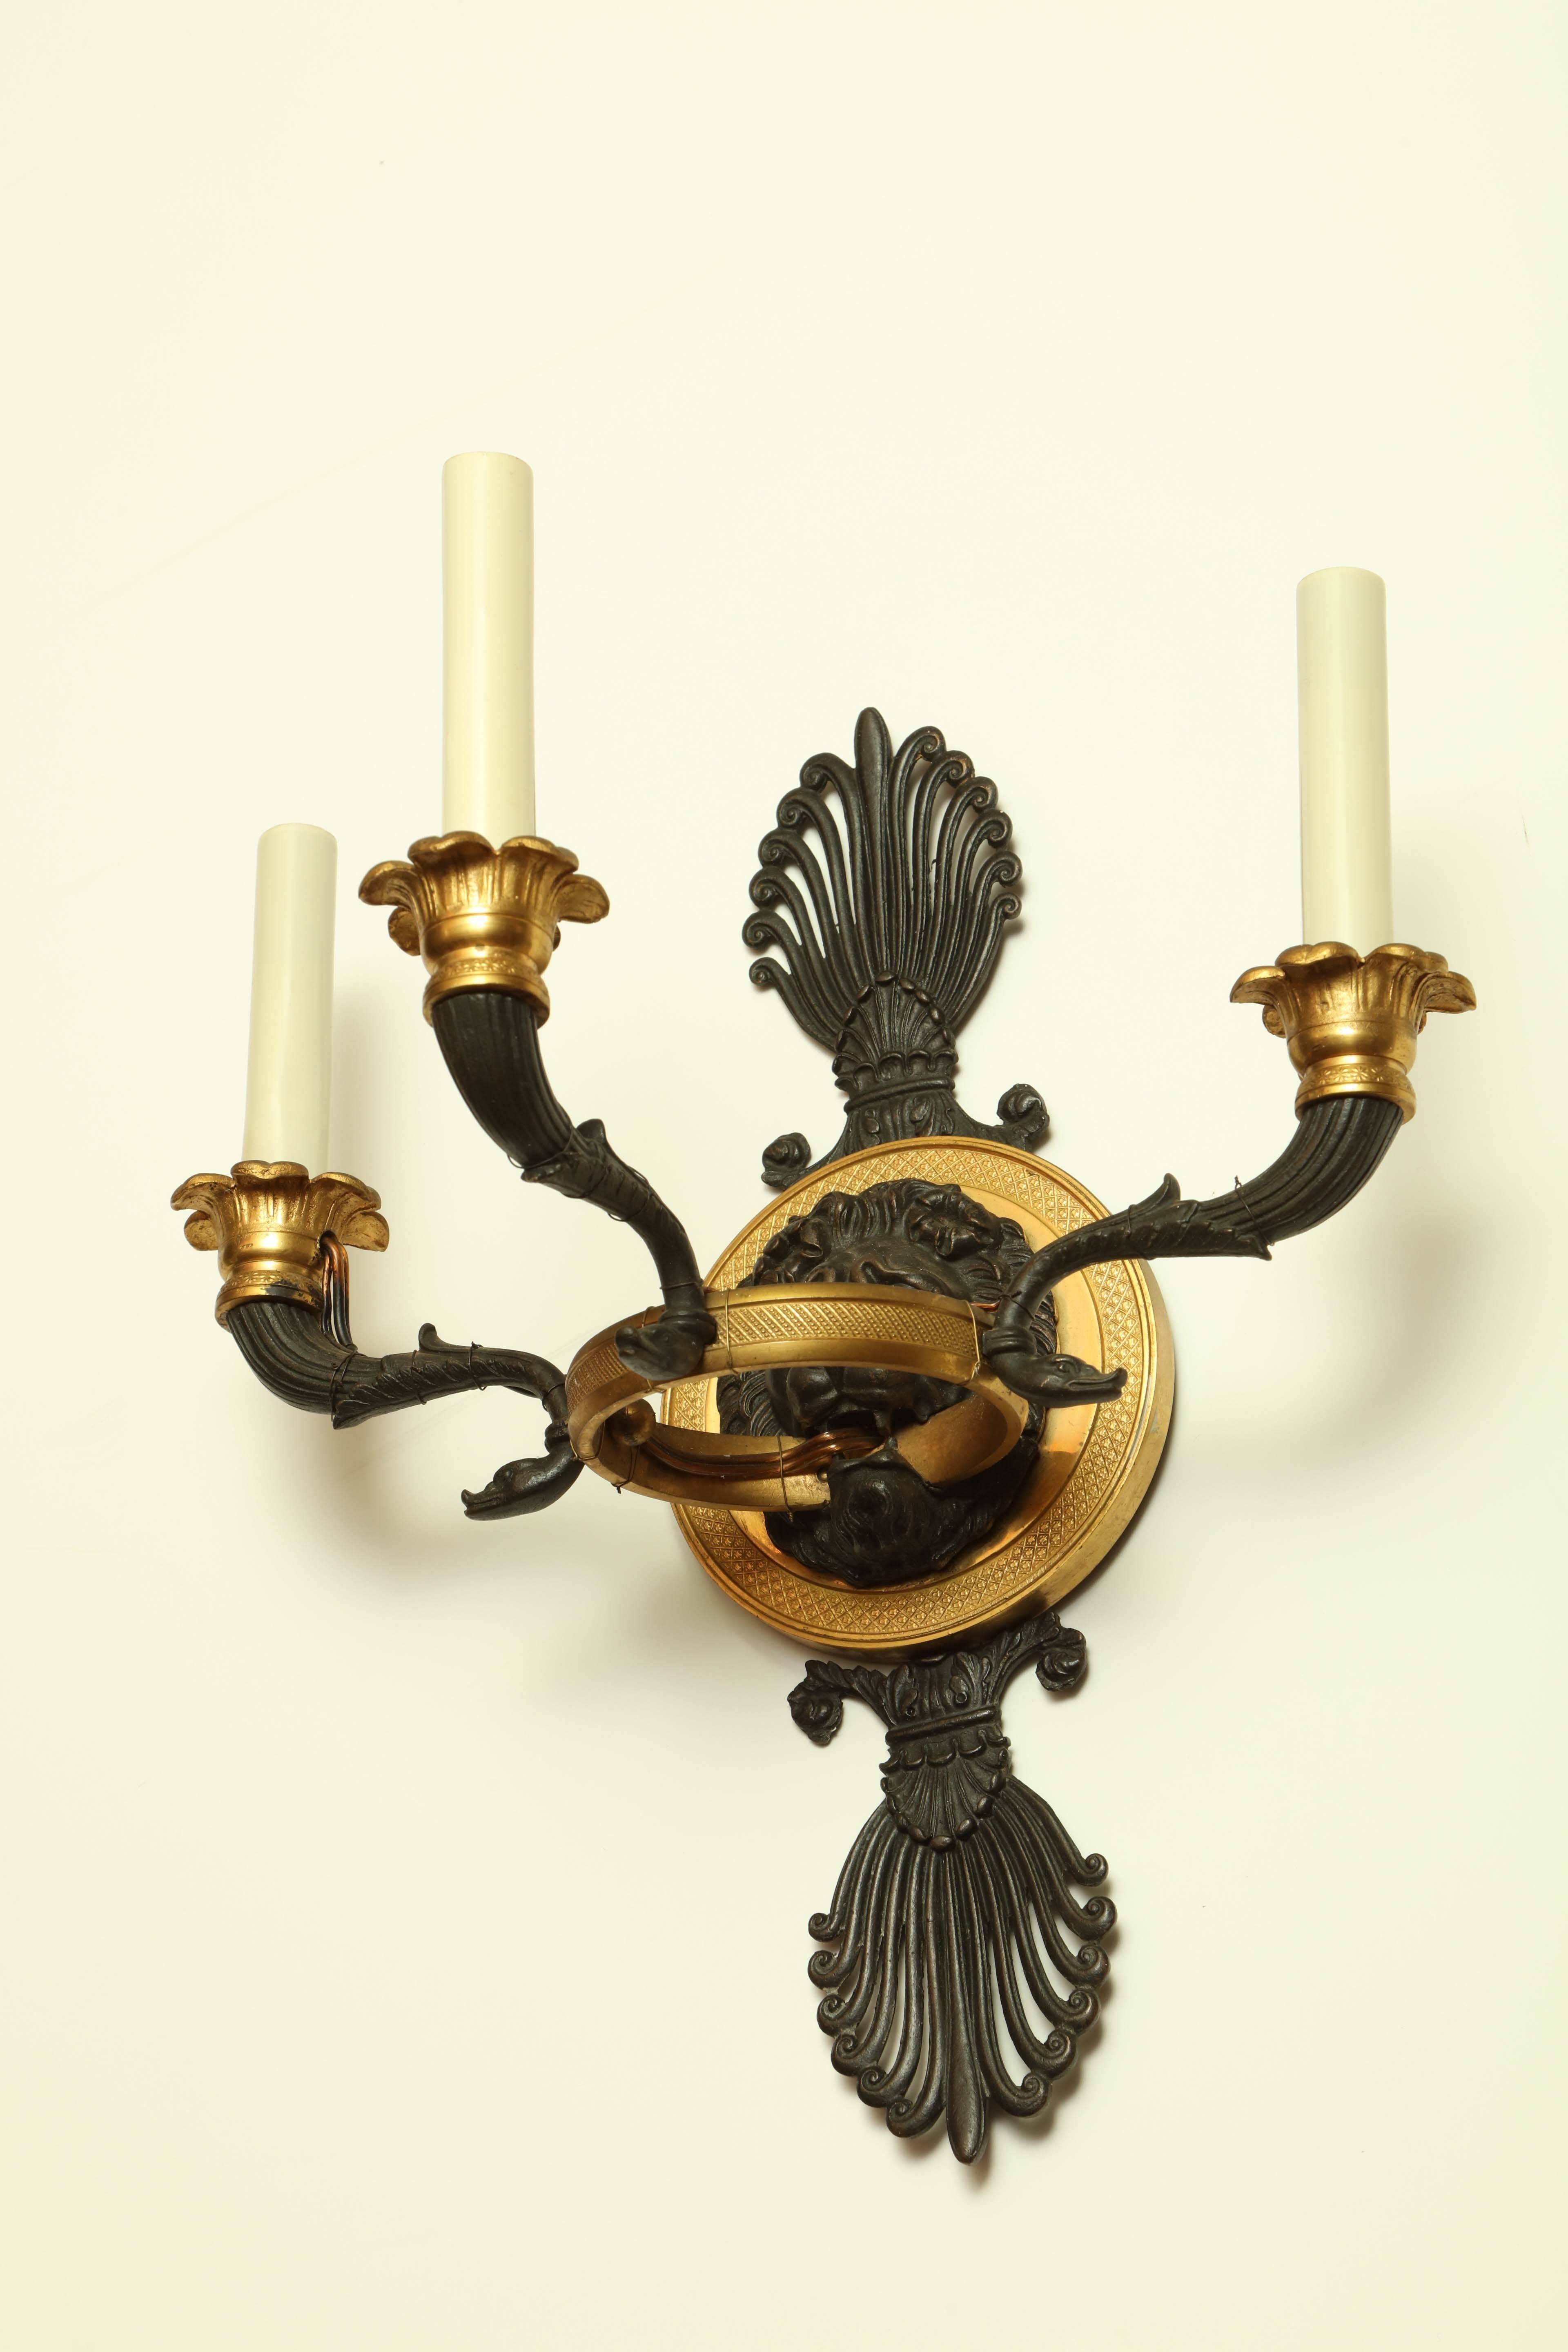 Pair of French Empire gilt bronze and patinated lion head three-light sconces.